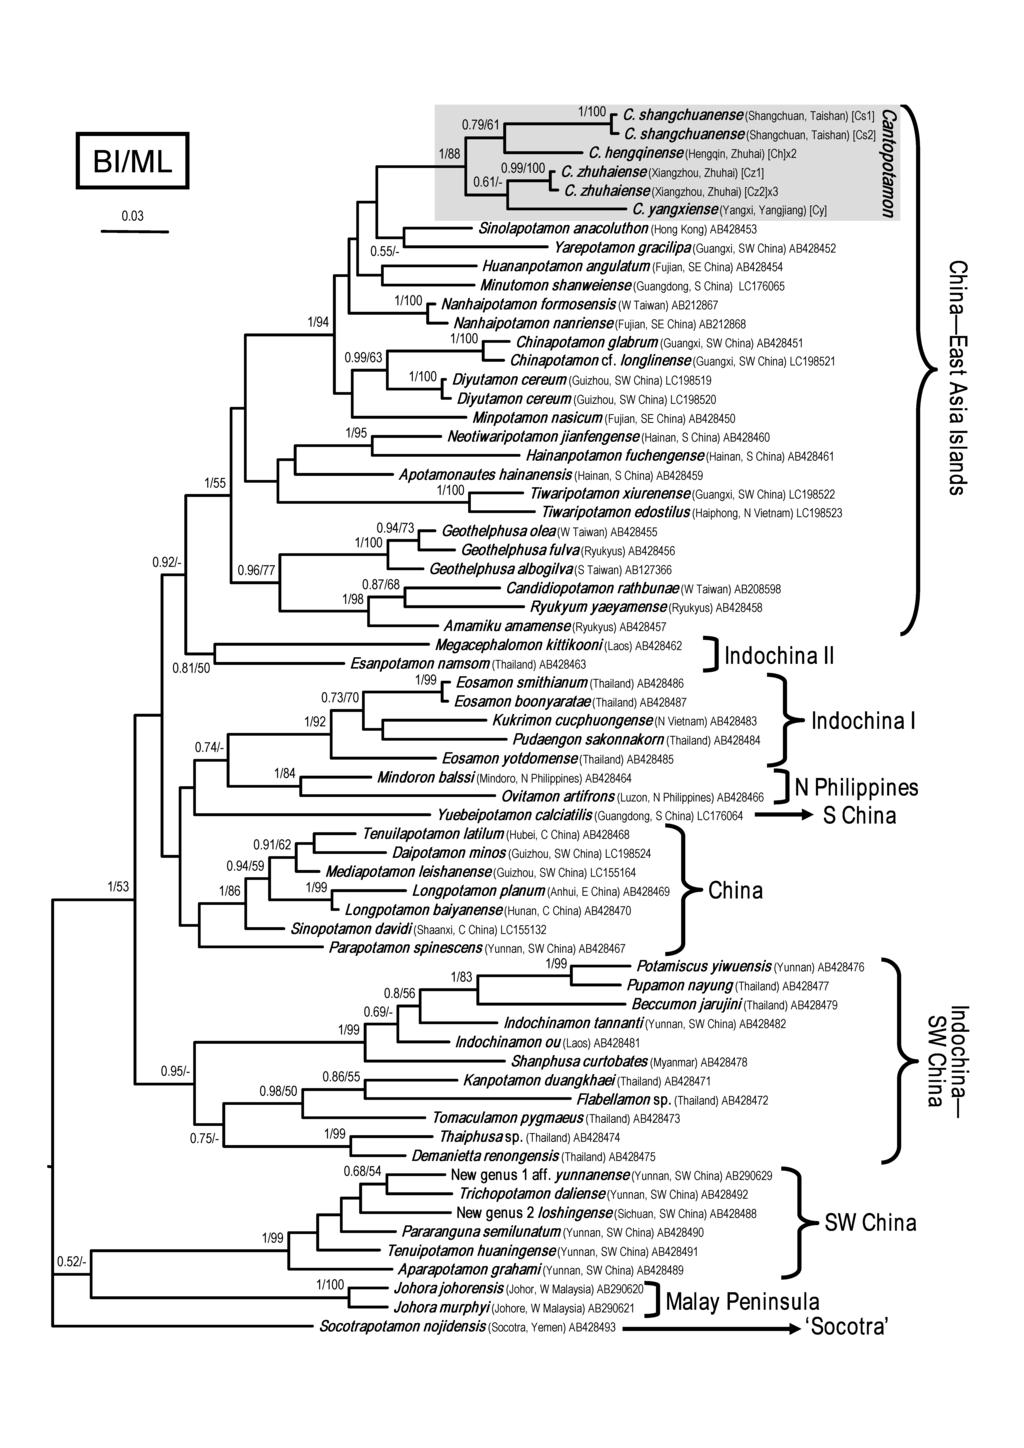 Zoological Studies 56: 41 (2017) page 17 of 20 Fig. 13. Bayesian inference (BI) tree of 16S rdna for the subfamily Potamiscinae, with the sequences and accession numbers in Shih et al.